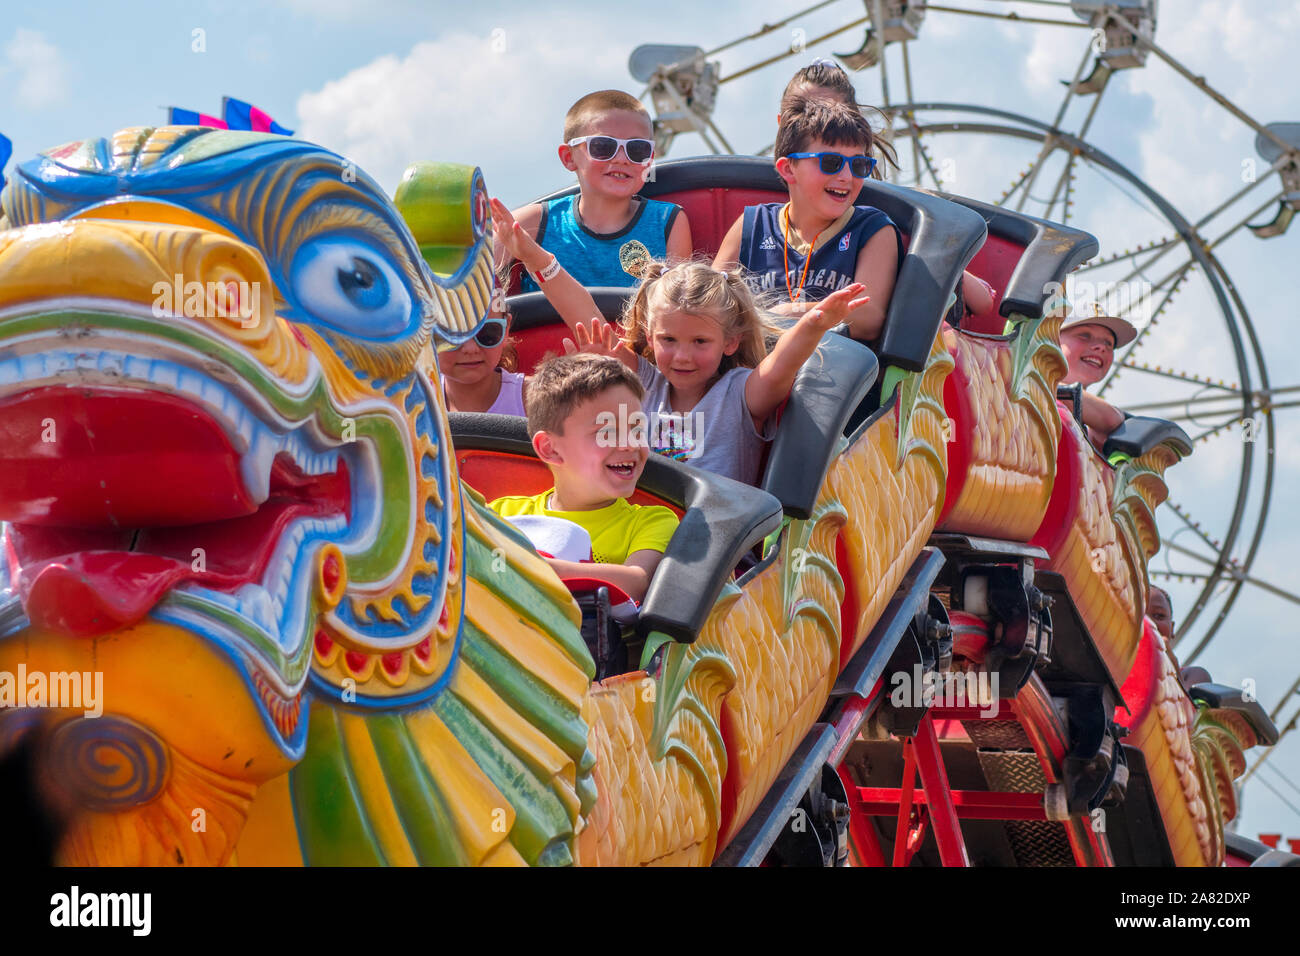 Battle Creek Michigan USA July 4, 2019; Happy children laugh as they ride on a roller coaster at the Field of Flight event Stock Photo